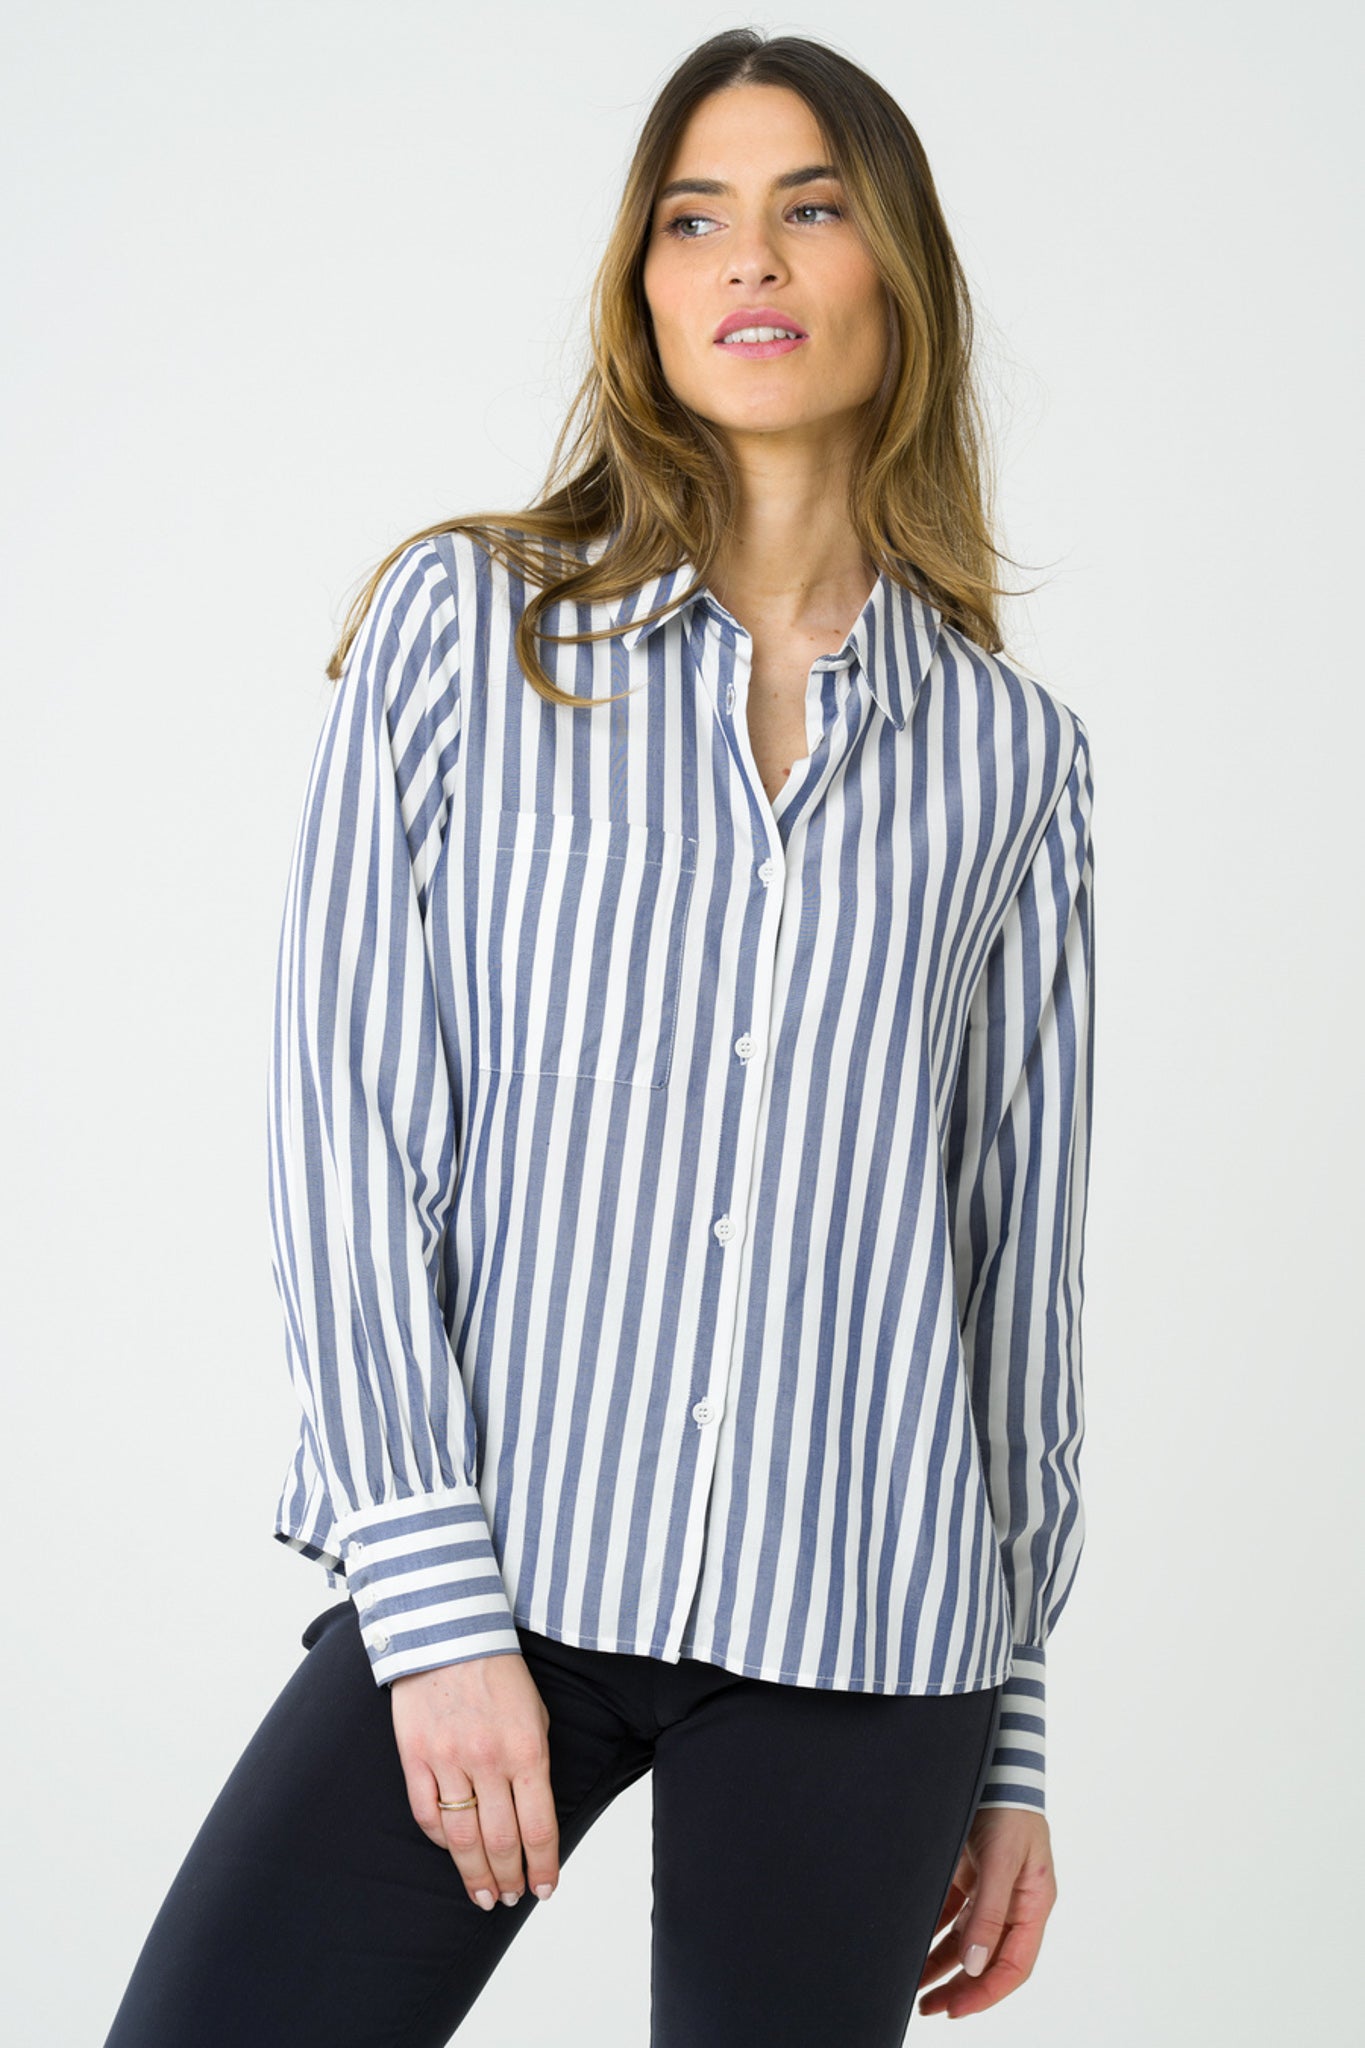 Blue striped blouse Kauri made of 100% Tencel by Avani